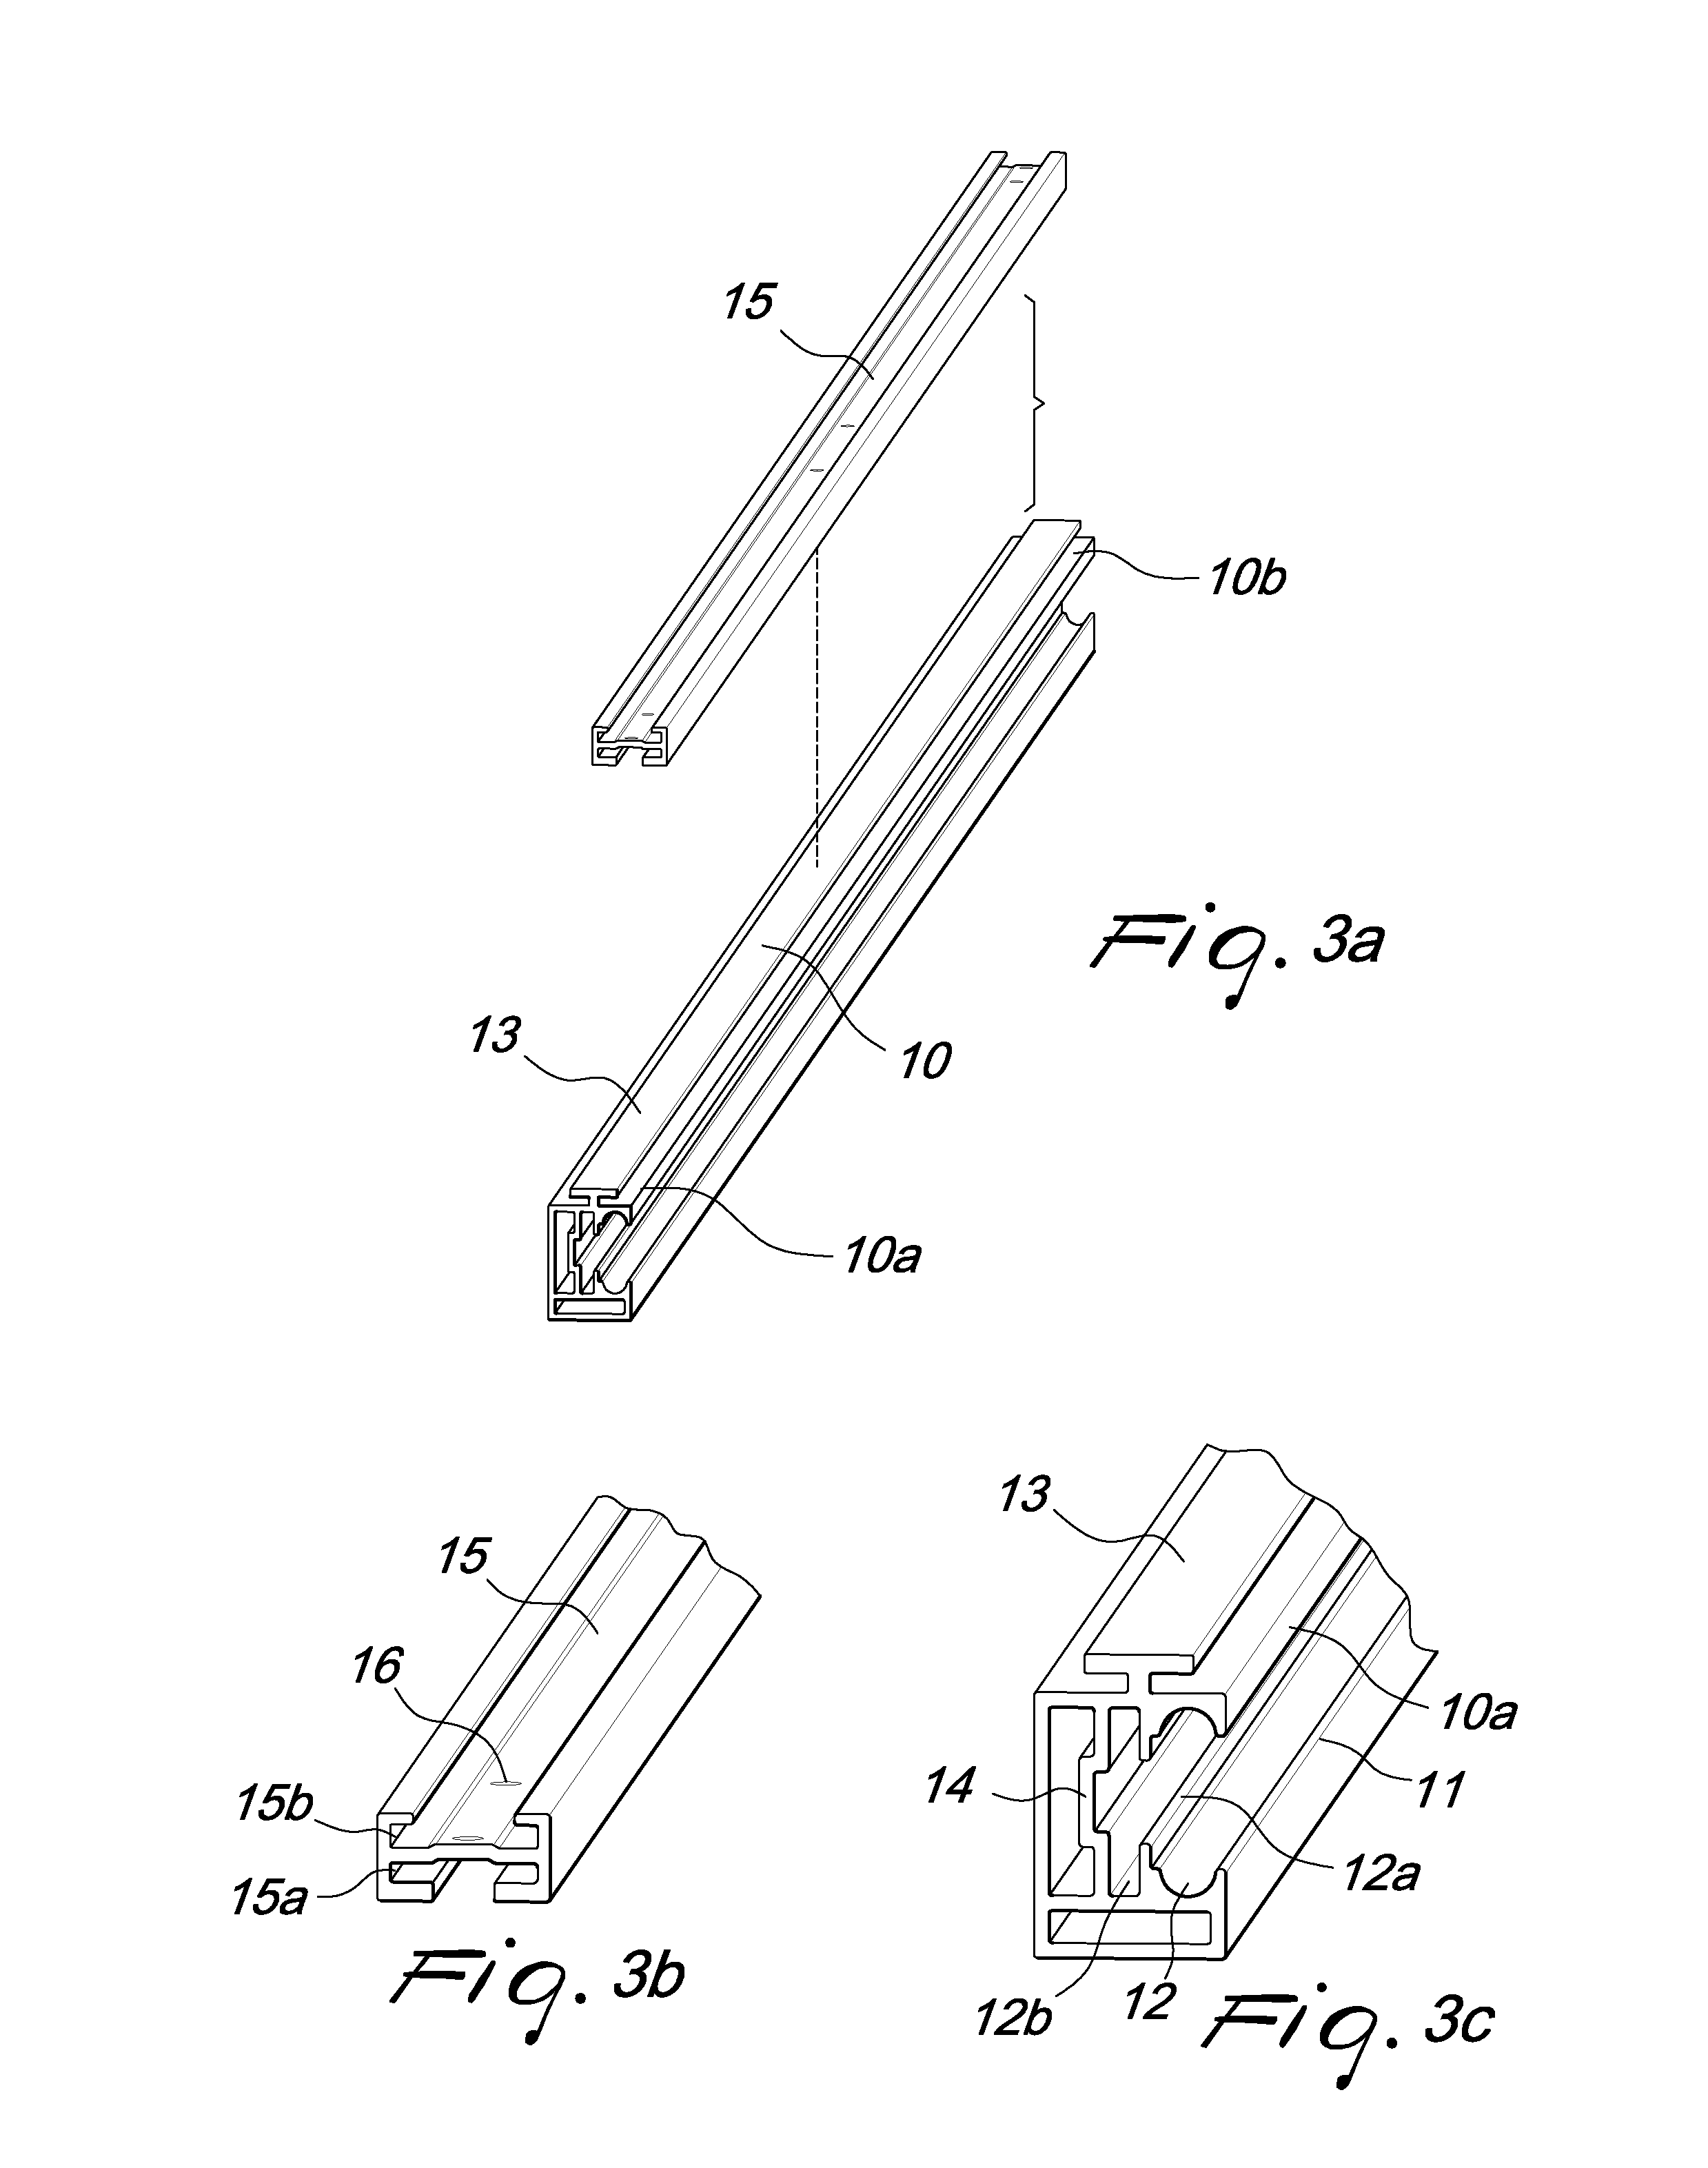 Device for applying laterally retracting doors, particularly for pieces of furniture